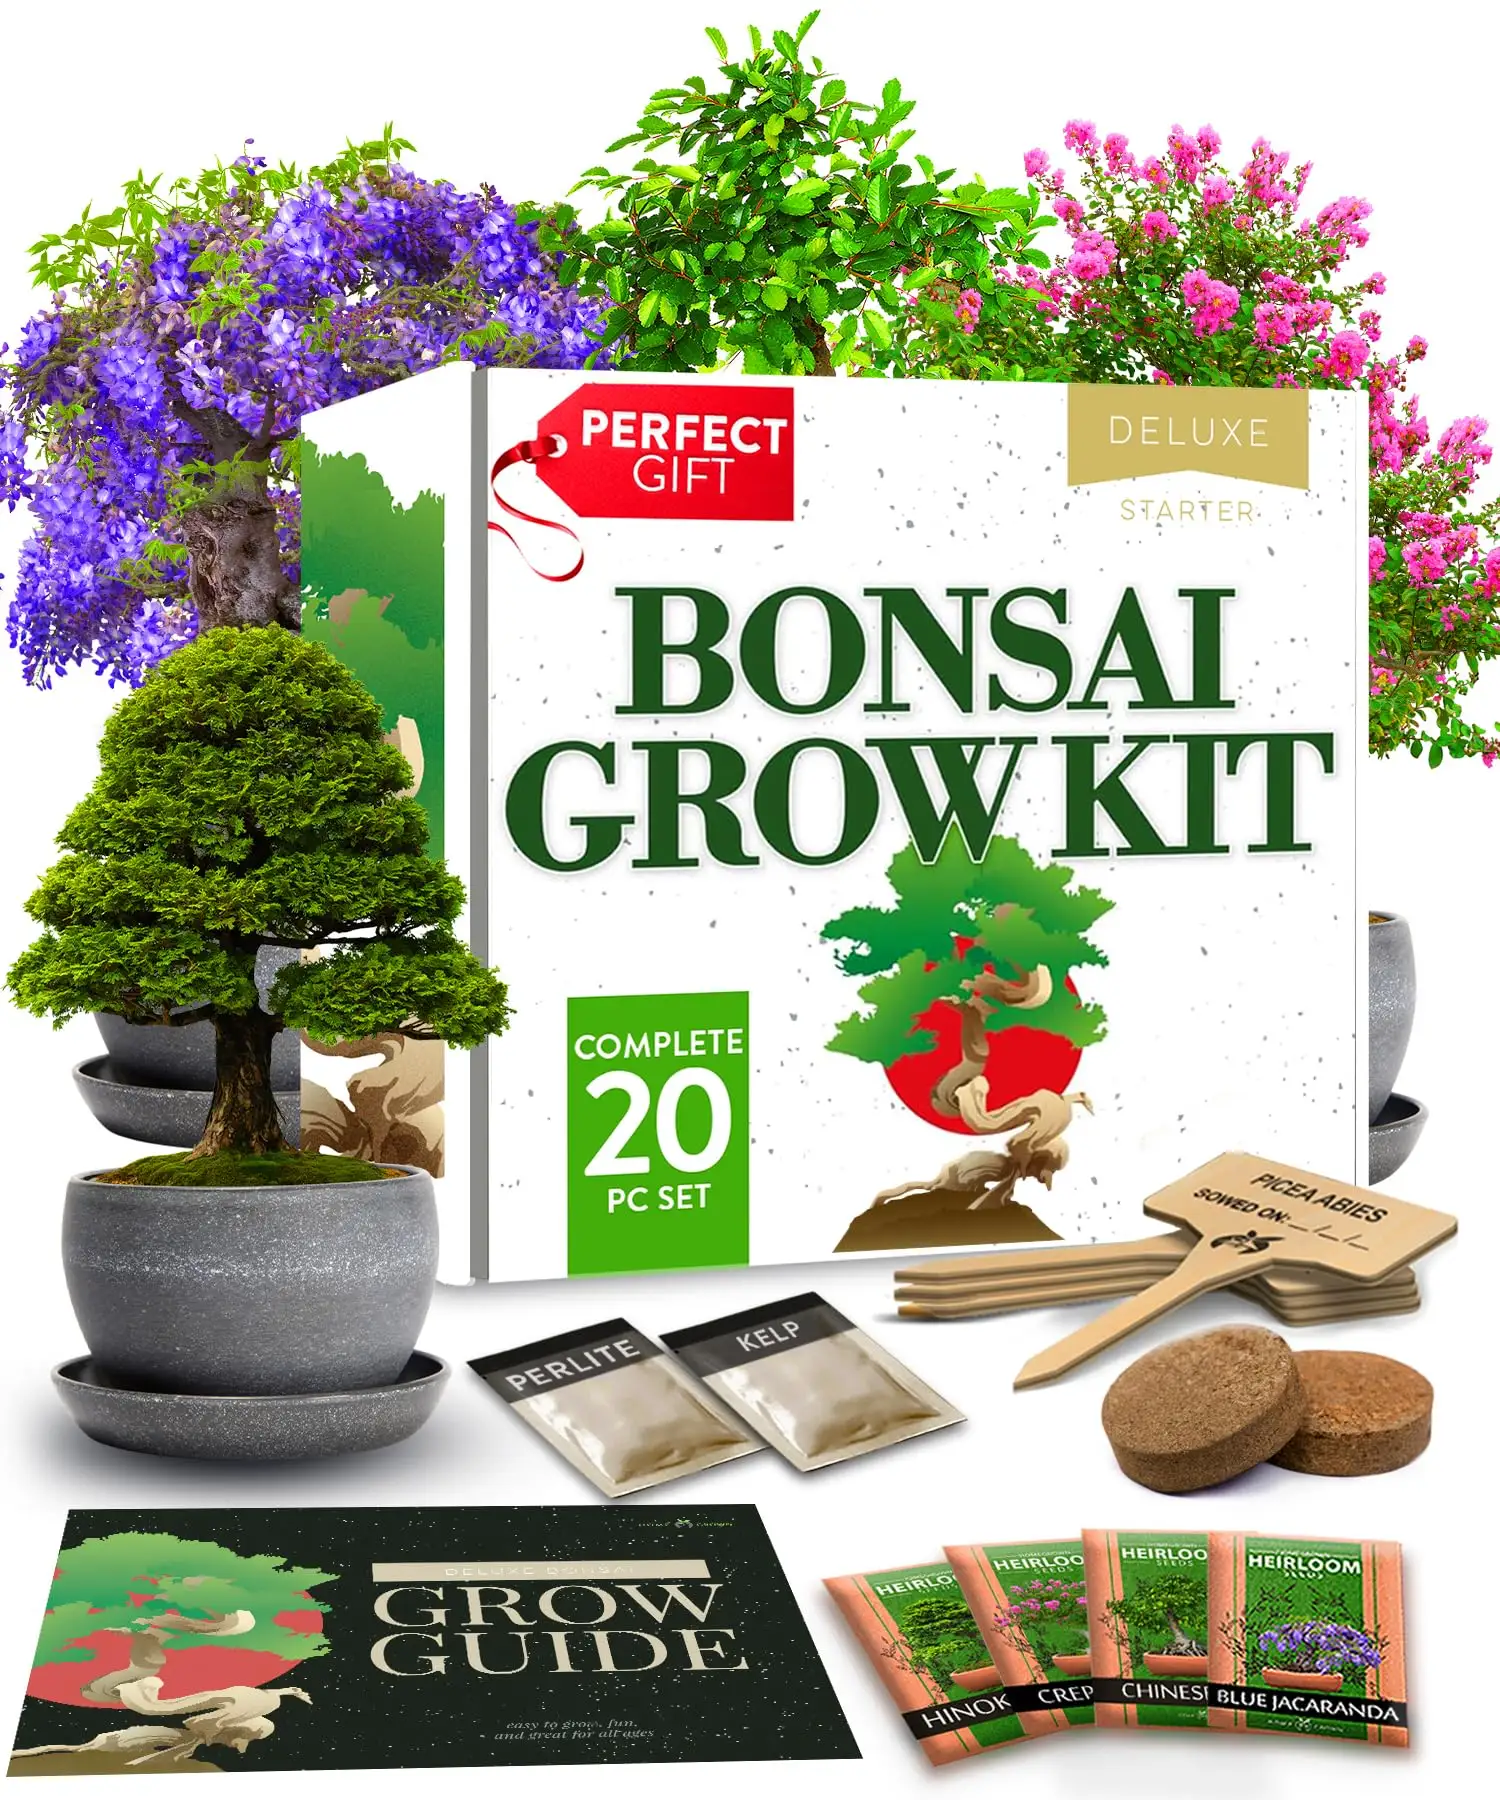 Easy to Grow 4 Species of Bonsai Tree Kit Complete Plant Kit with Bonsai Pots Peat Pellets